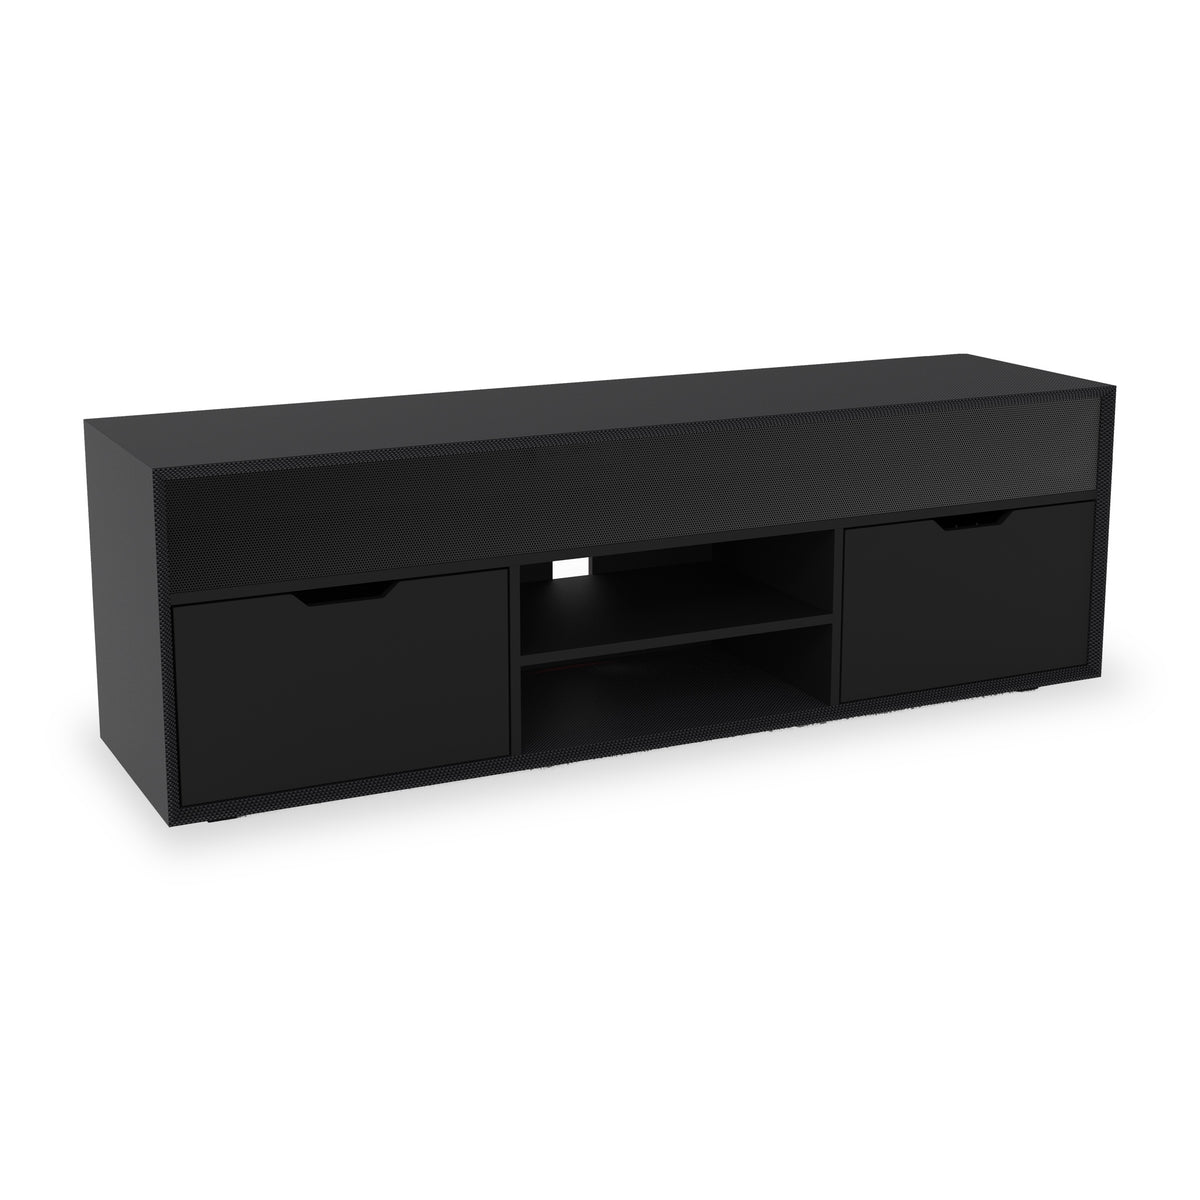 Koble Shadow Gaming TV Unit from Roseland Furniture